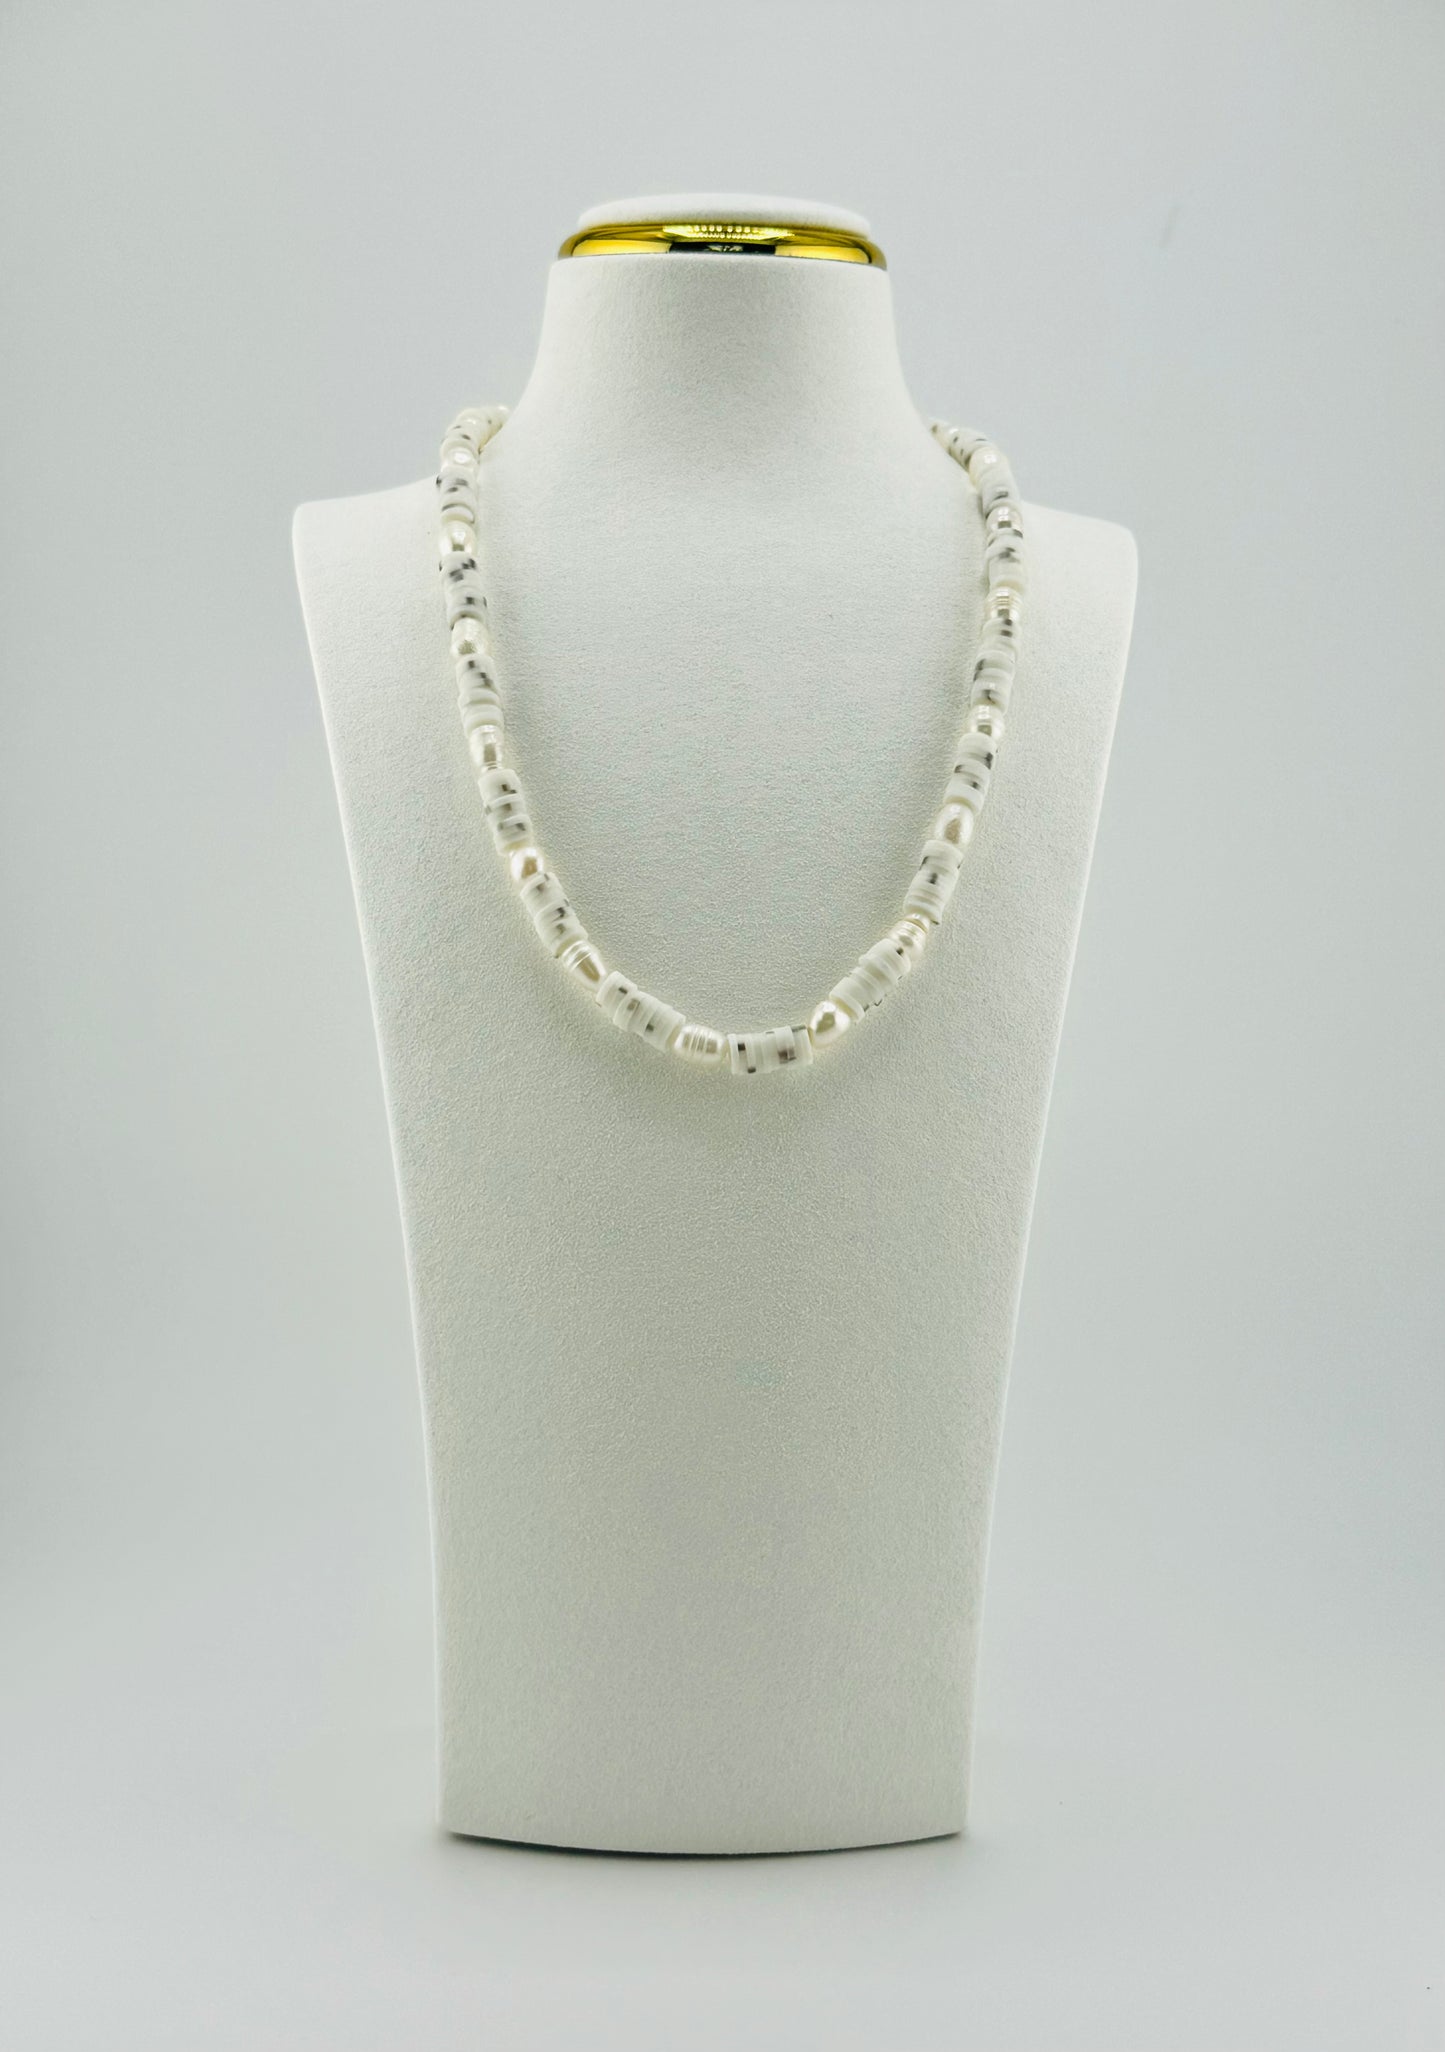 Penelope necklace is clay beads with fresh water pearls